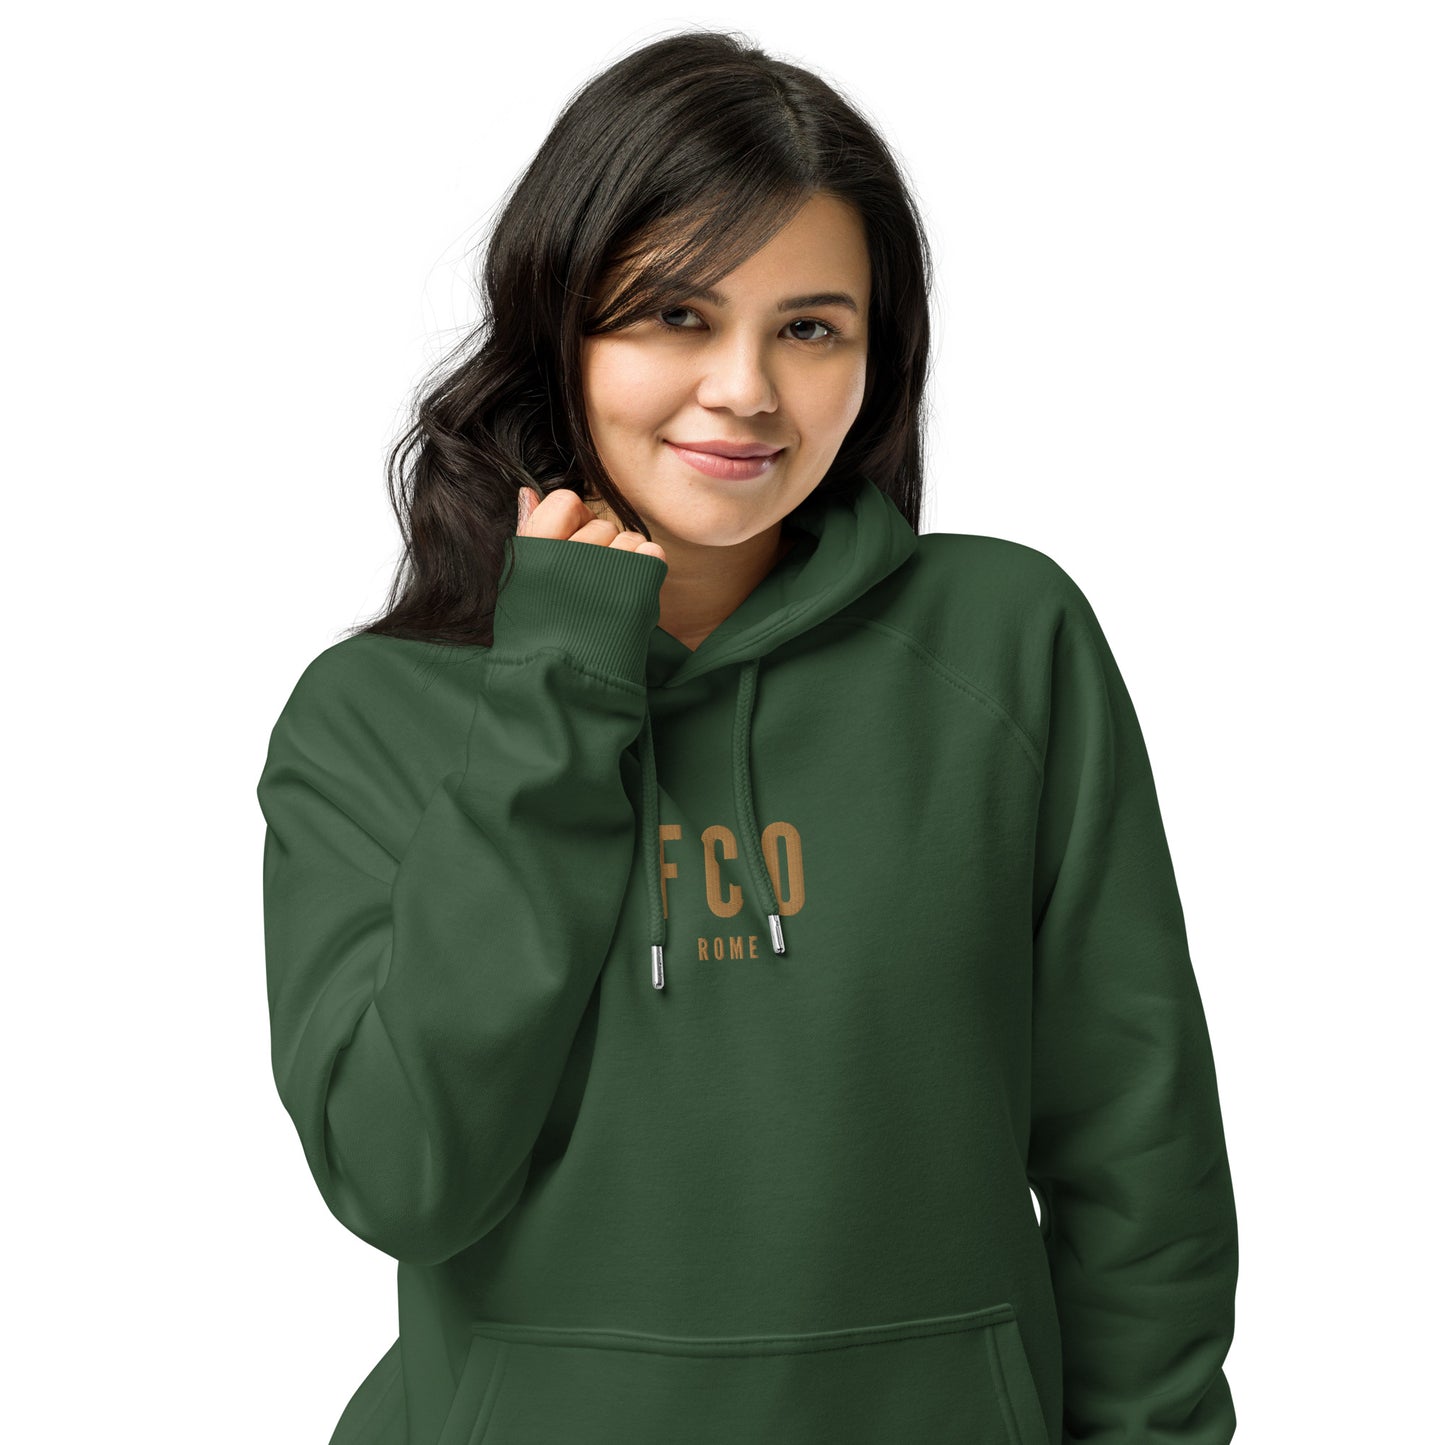 City Organic Hoodie - Old Gold • FCO Rome • YHM Designs - Image 03